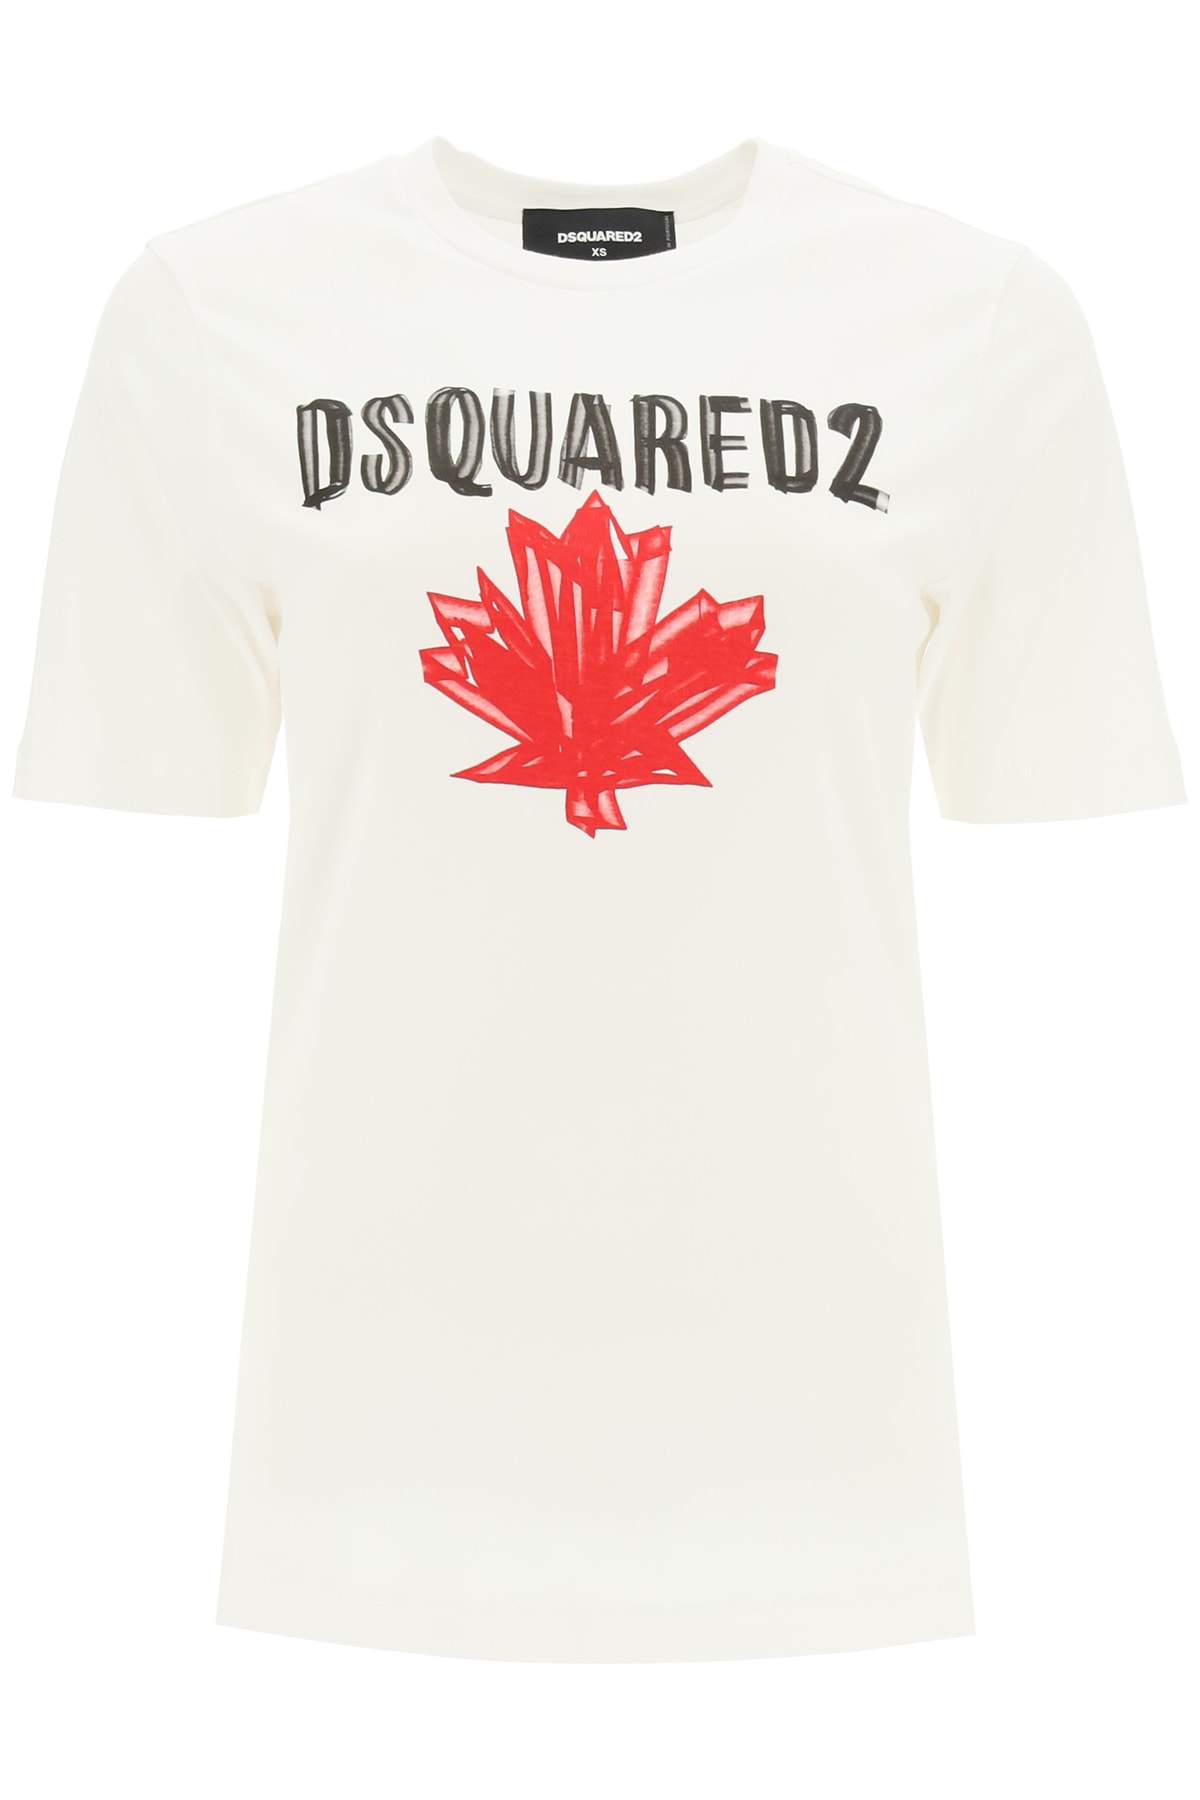 DSQUARED2 T-SHIRT WITH LOGO PRINT,S75GD0156 S22844100